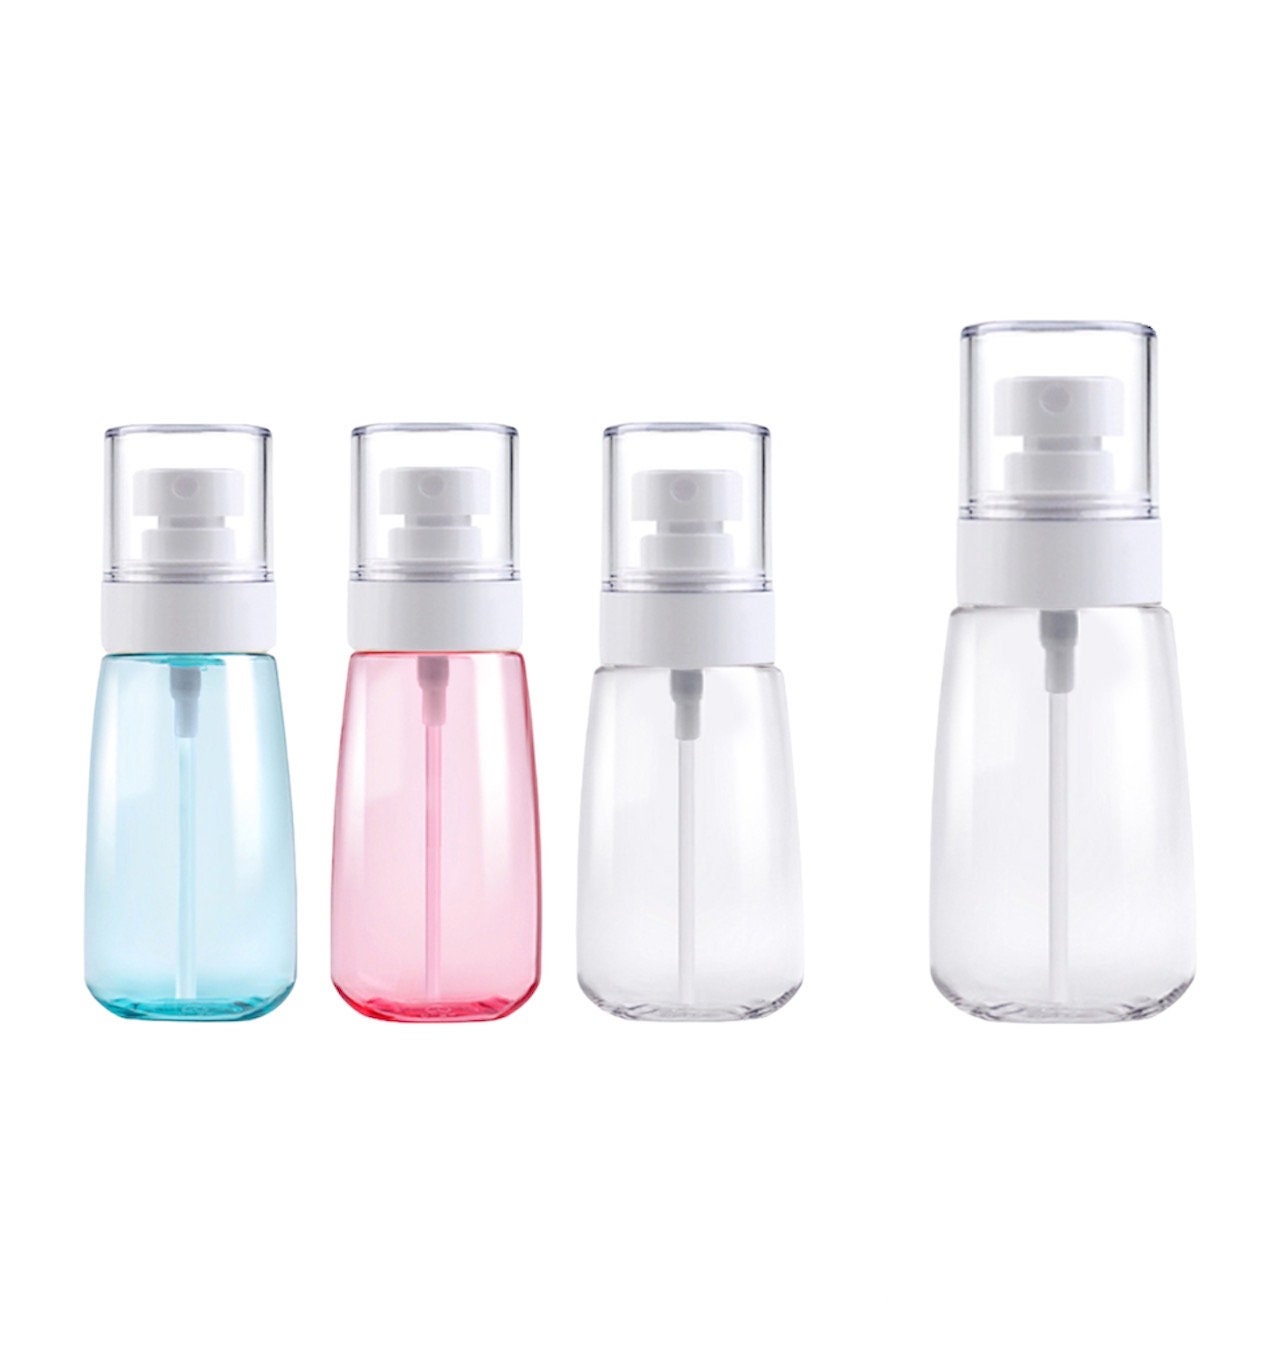 Small Spray Bottle With Fine Mist, 2 Pack 3.4oz/100ml Travel Spray Bottles  For Hair And Face, Refillable Spray Bottles For Cleaning Solutions,  Perfume, Liquid Cosmetics, Essential Oils TSA